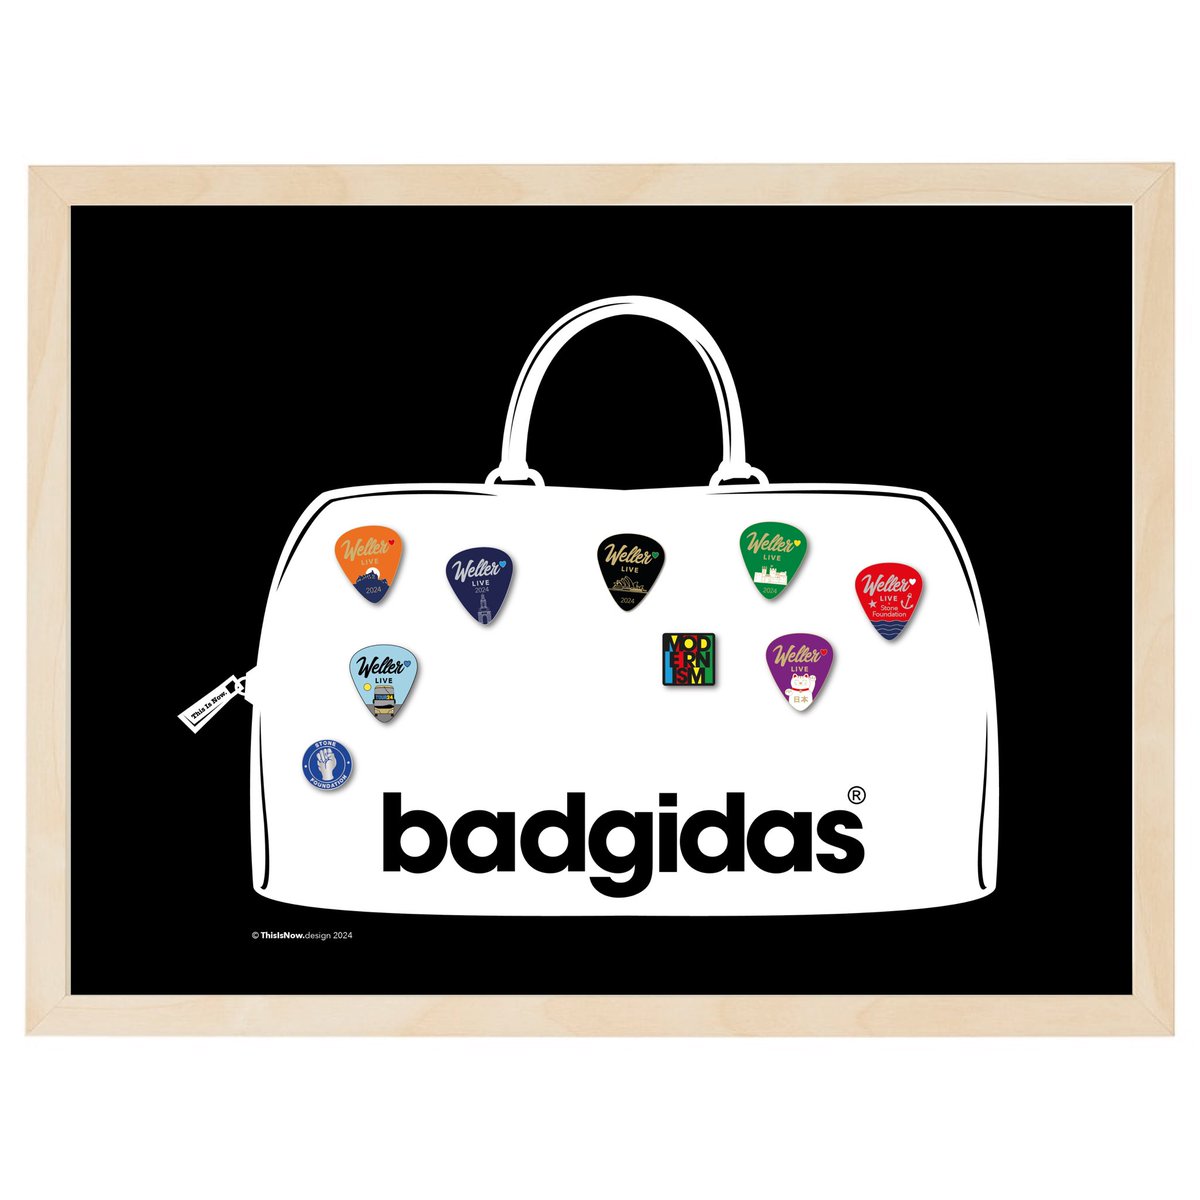 Today’s new ‘word’ is #Badgidas

Early doors we did display boards 4 #LoveWellerLive pins, it’s high time for new ones…

Bloomin’ obvious… the ‘Badgidas’ holdall, iconic design to display badges upon!🙄

Available soon & perfect timing for a 2x-busy year of new pins! #StayTuned